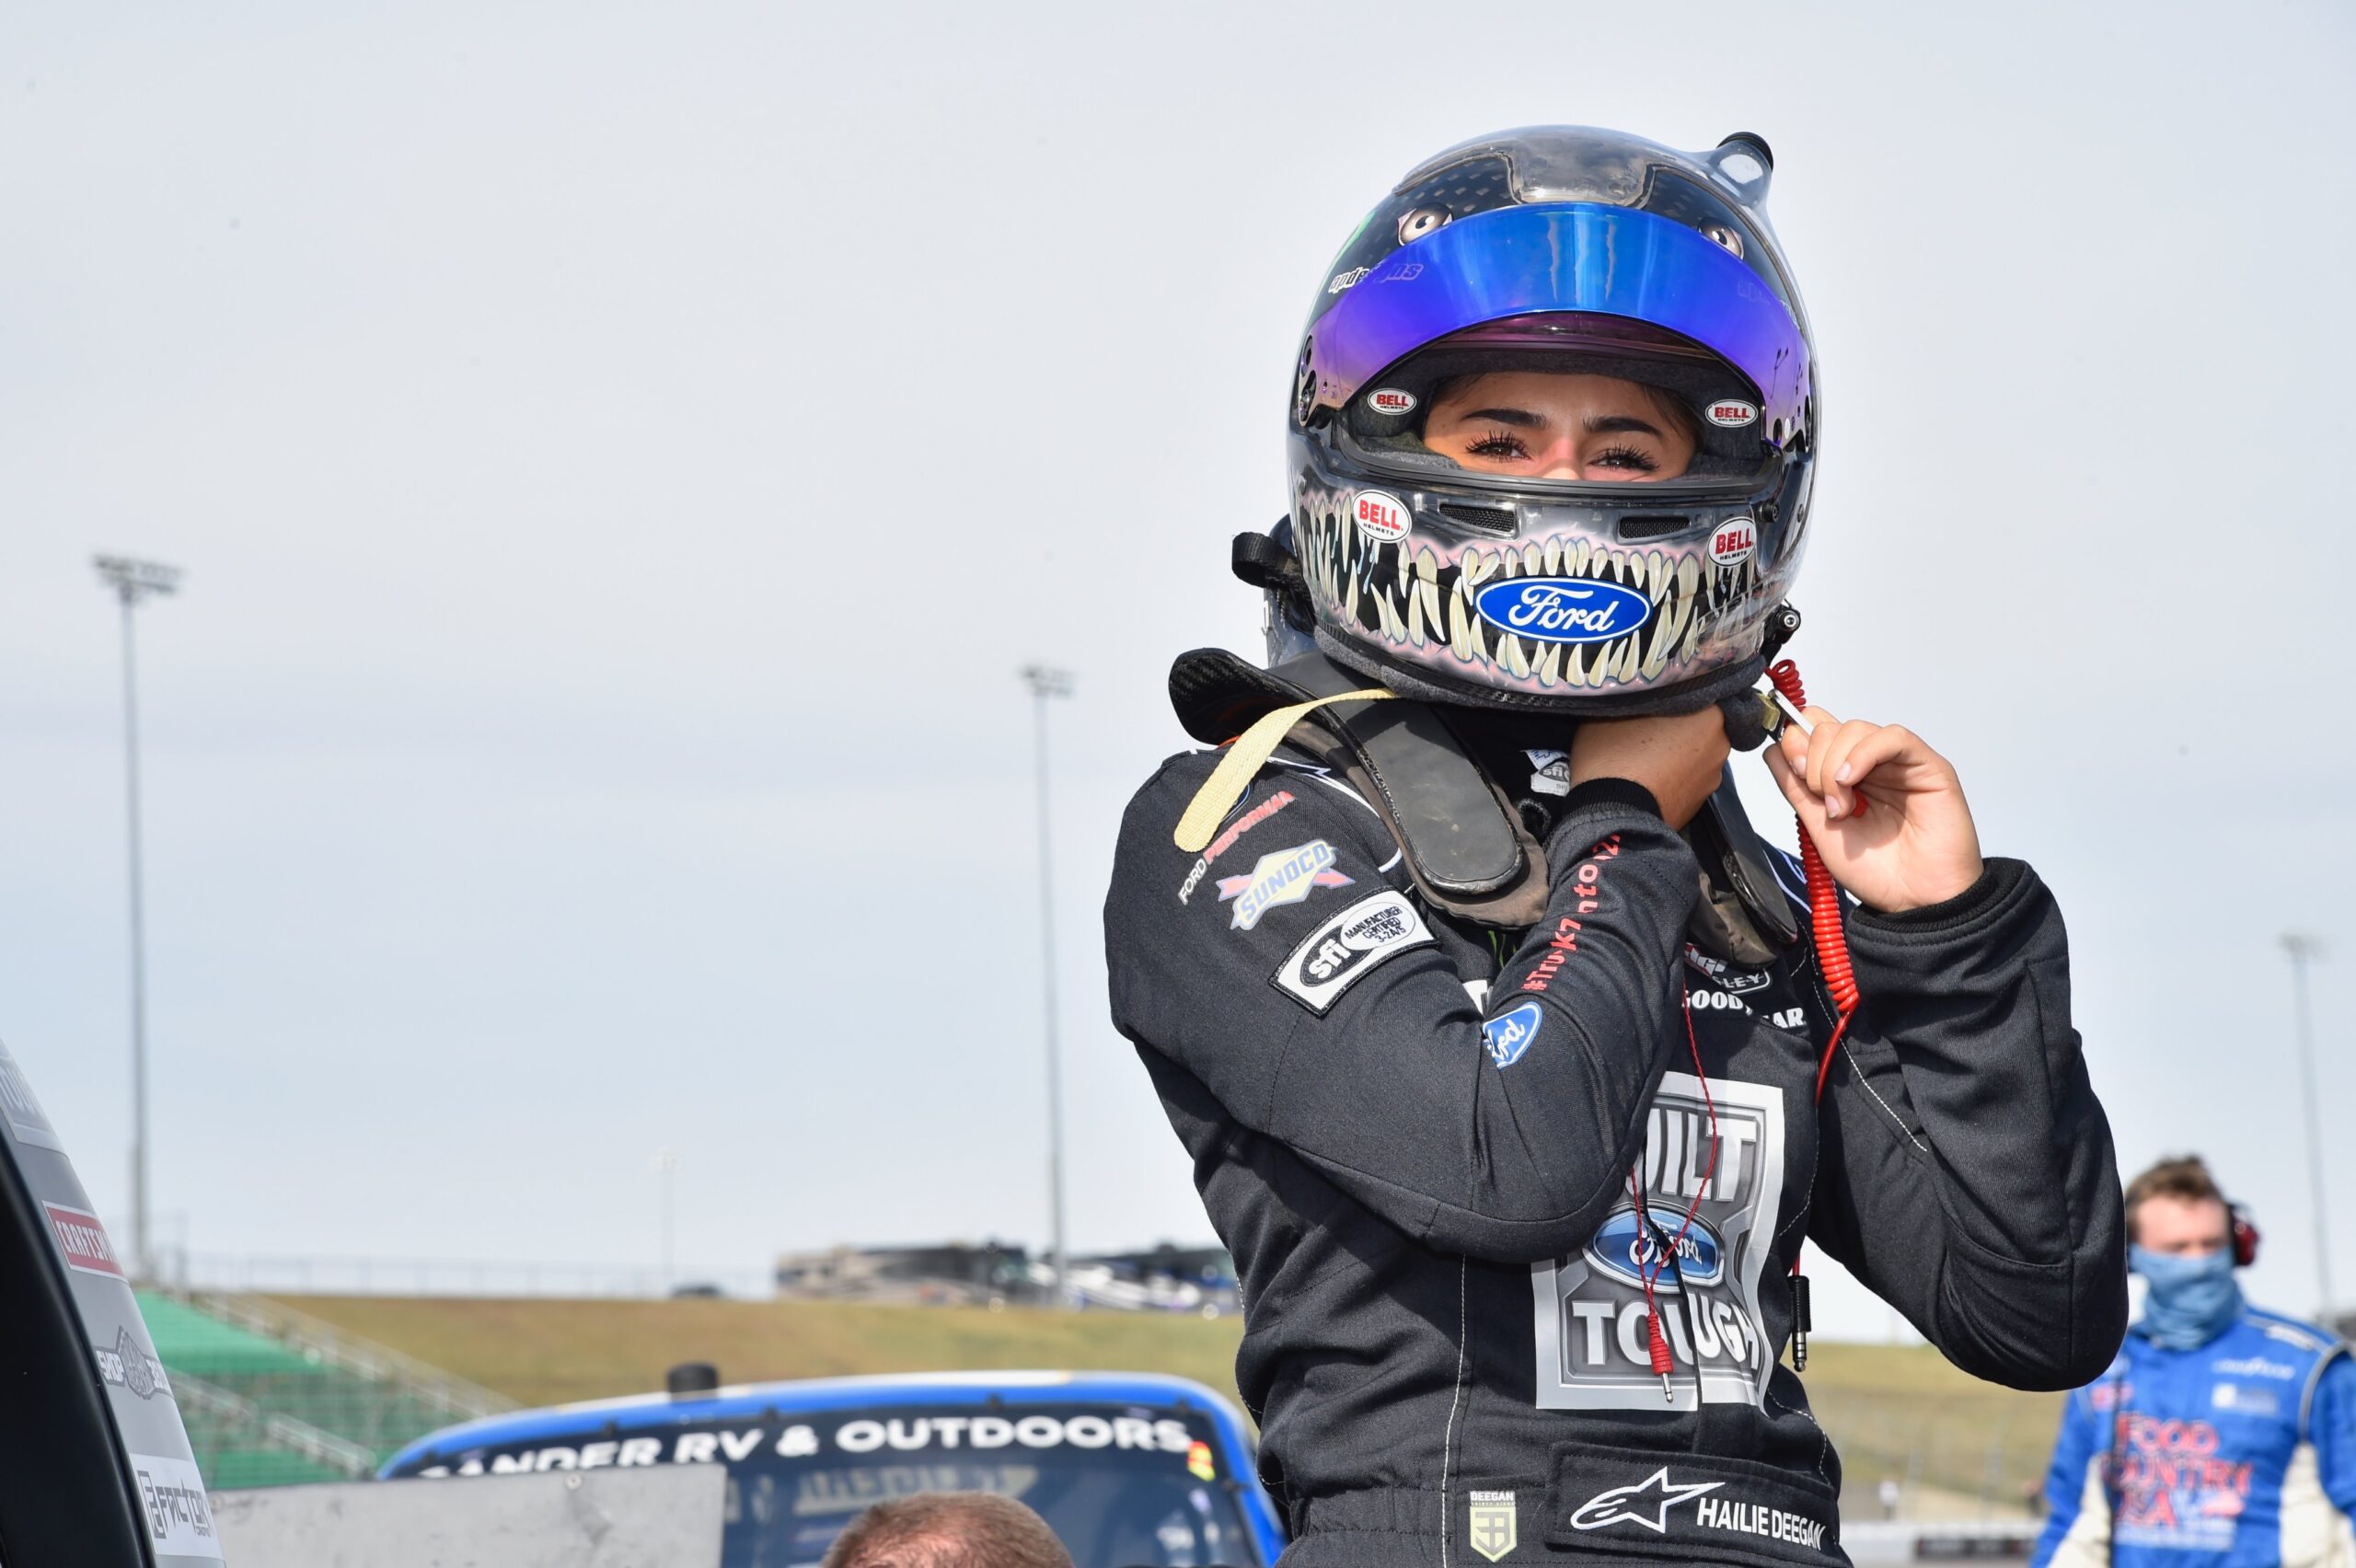 Deegan prepares to make her first laps in the NASCAR Gander RV &amp; Outdoors Truck Series at Kansas Speedway. (Image: Ford Performance Social Media.)